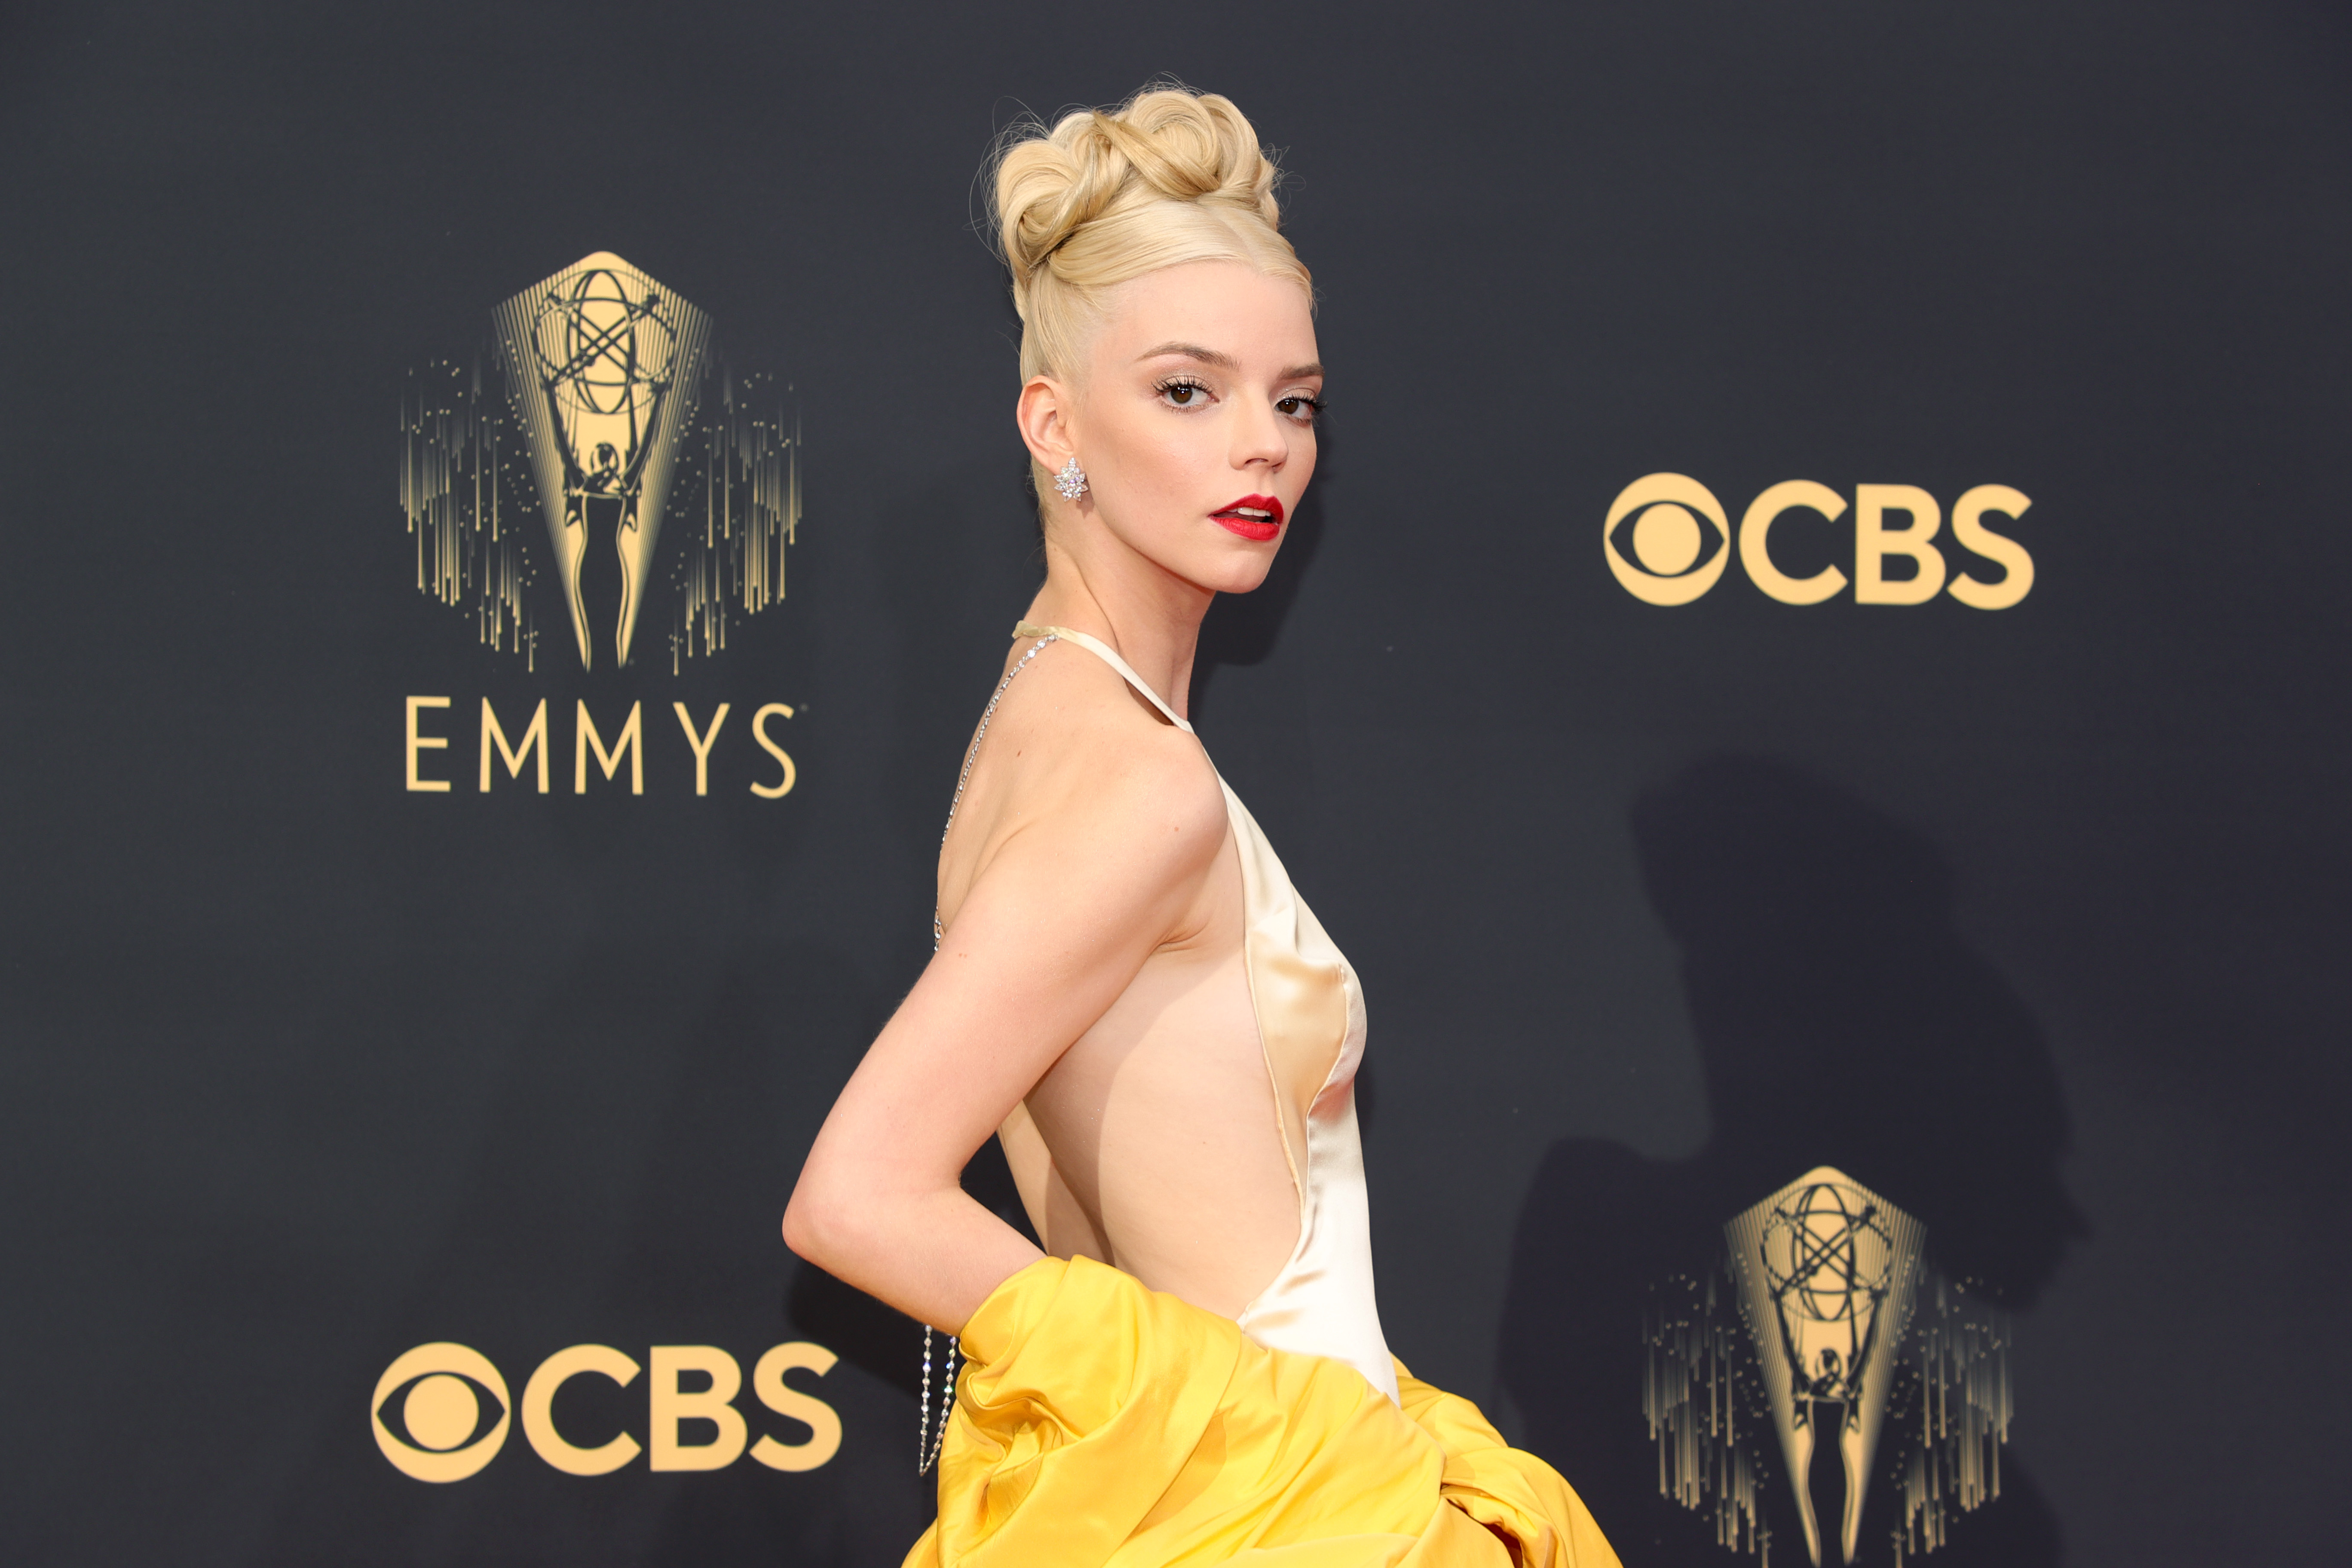 The Witch actor Anya Taylor Joy wears a yellow dress.